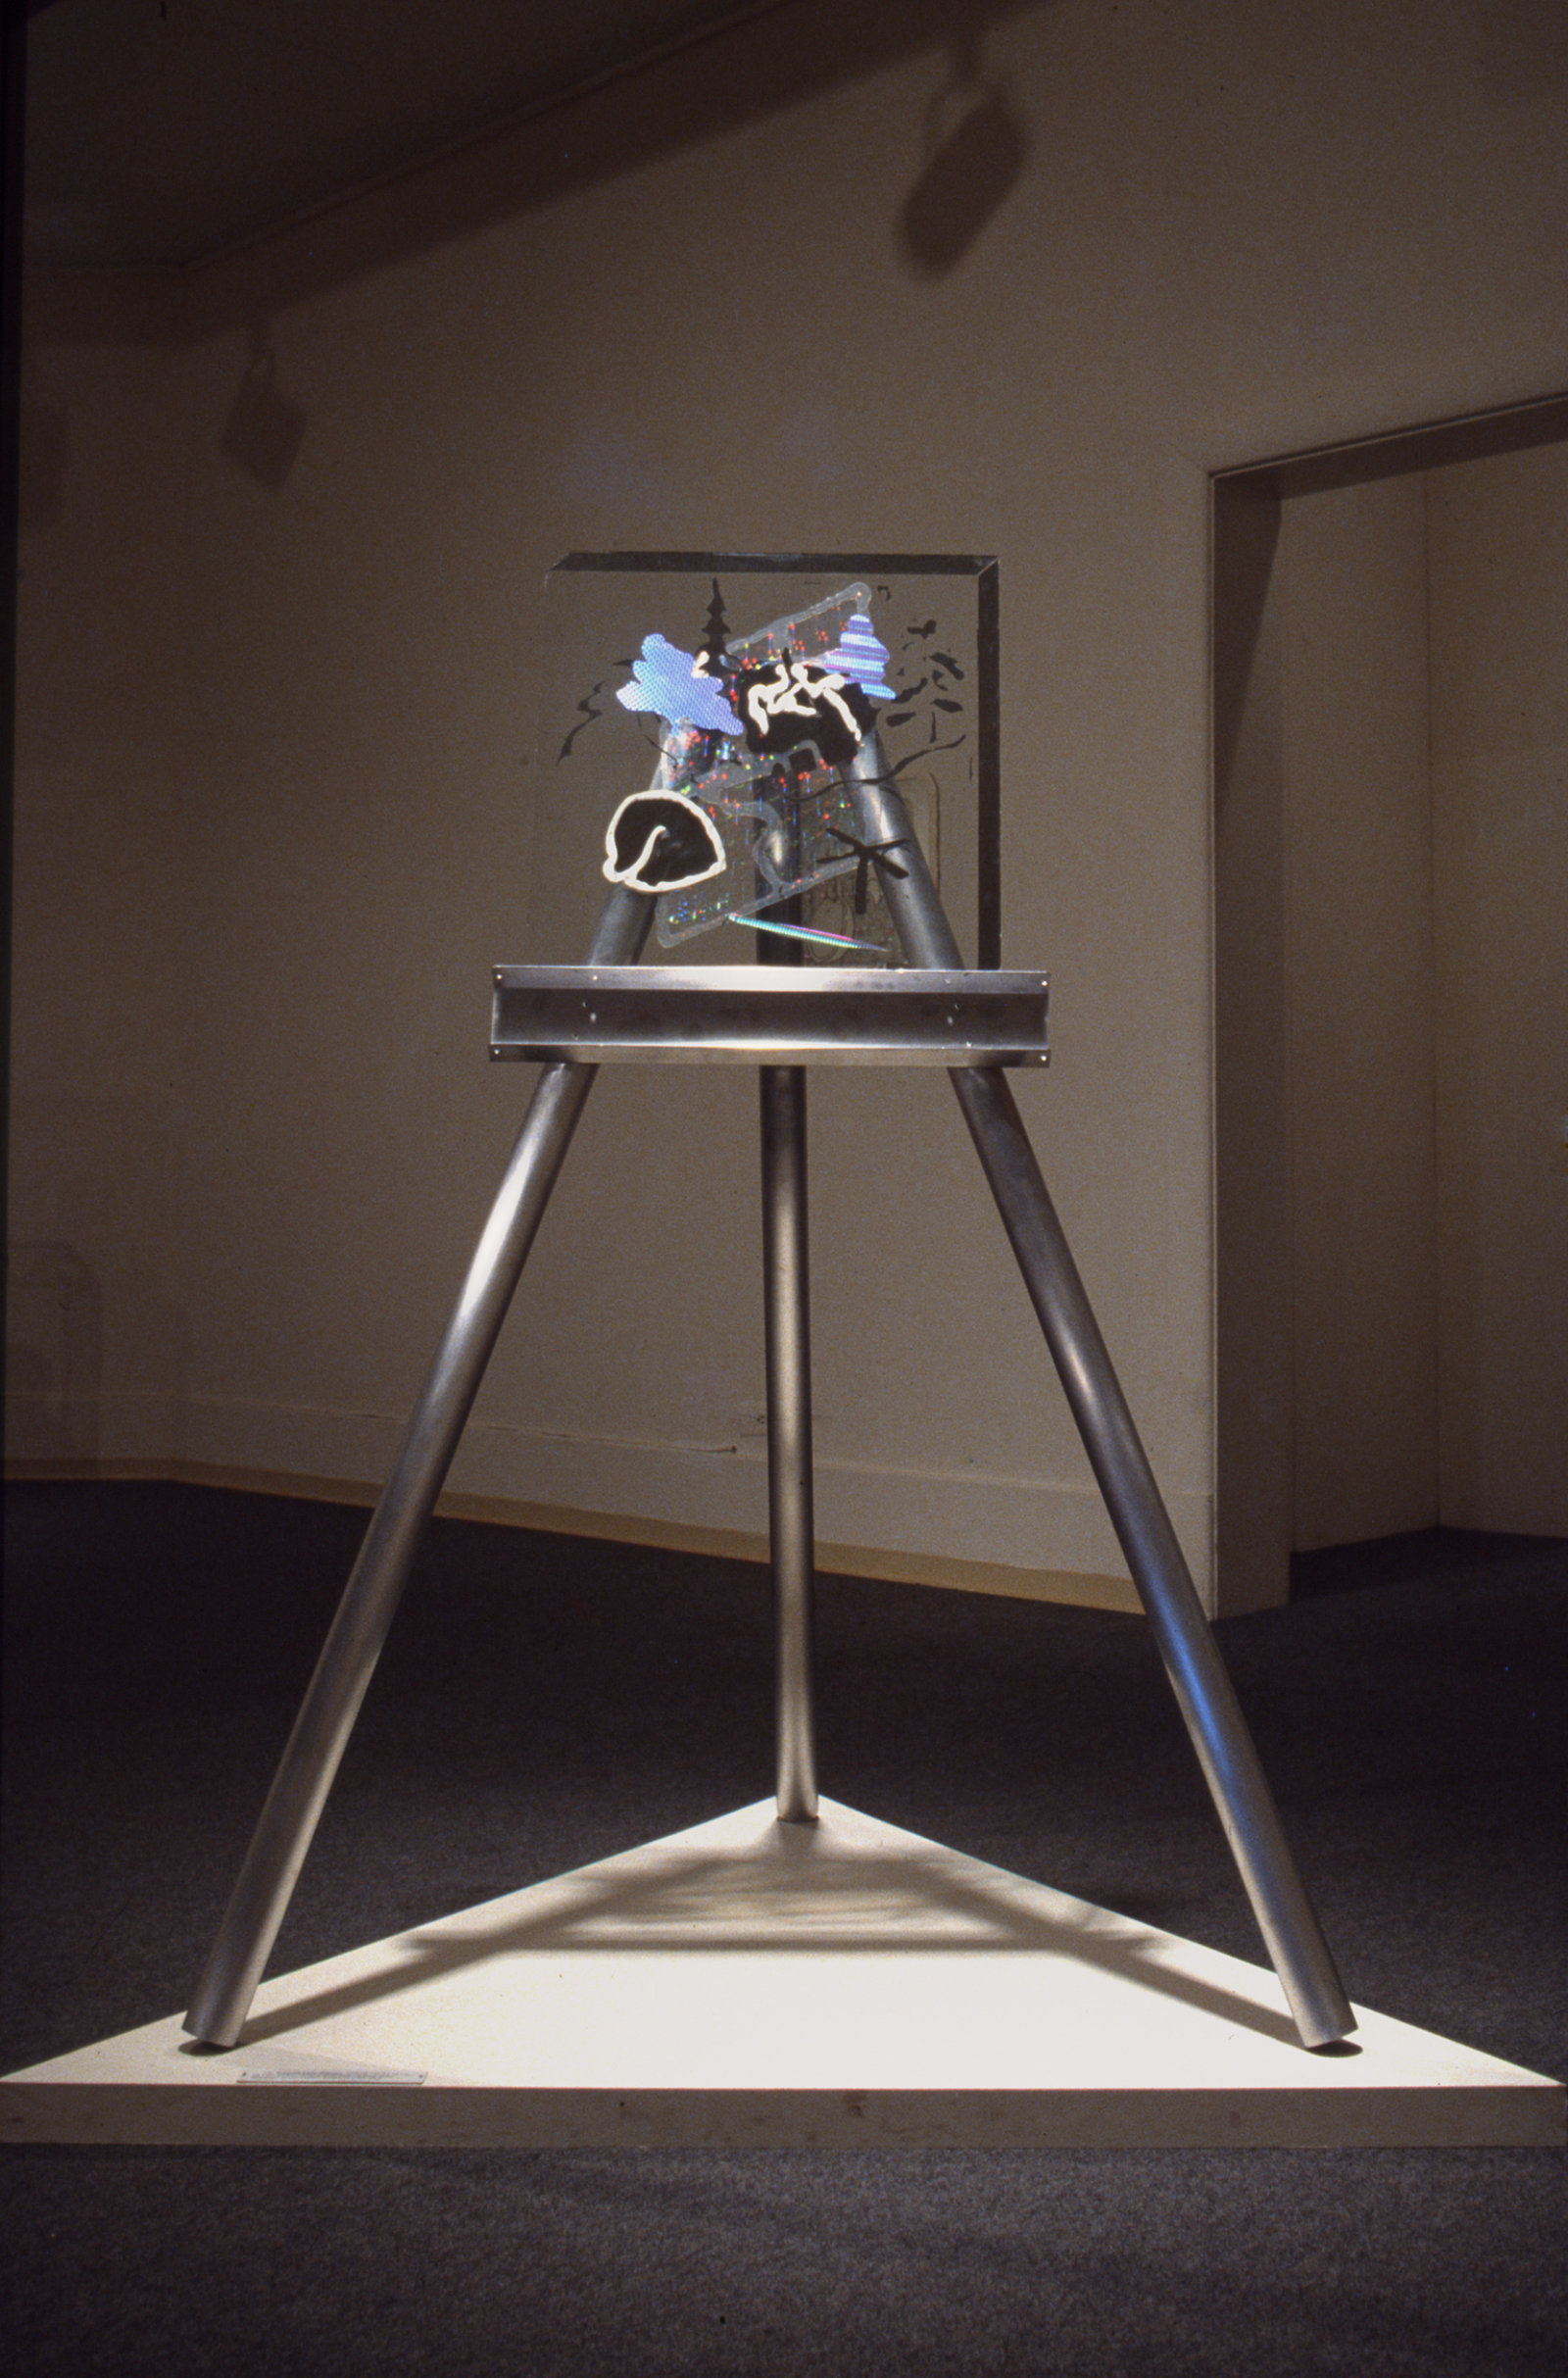 Jerry Pethick, Krieghoff Easel (Signed), 1978–1979, etched mirror, diffraction grating, glass, aluminum, silicone sealant, 56 x 28 x 28 in. (142 x 79 x 79 cm)